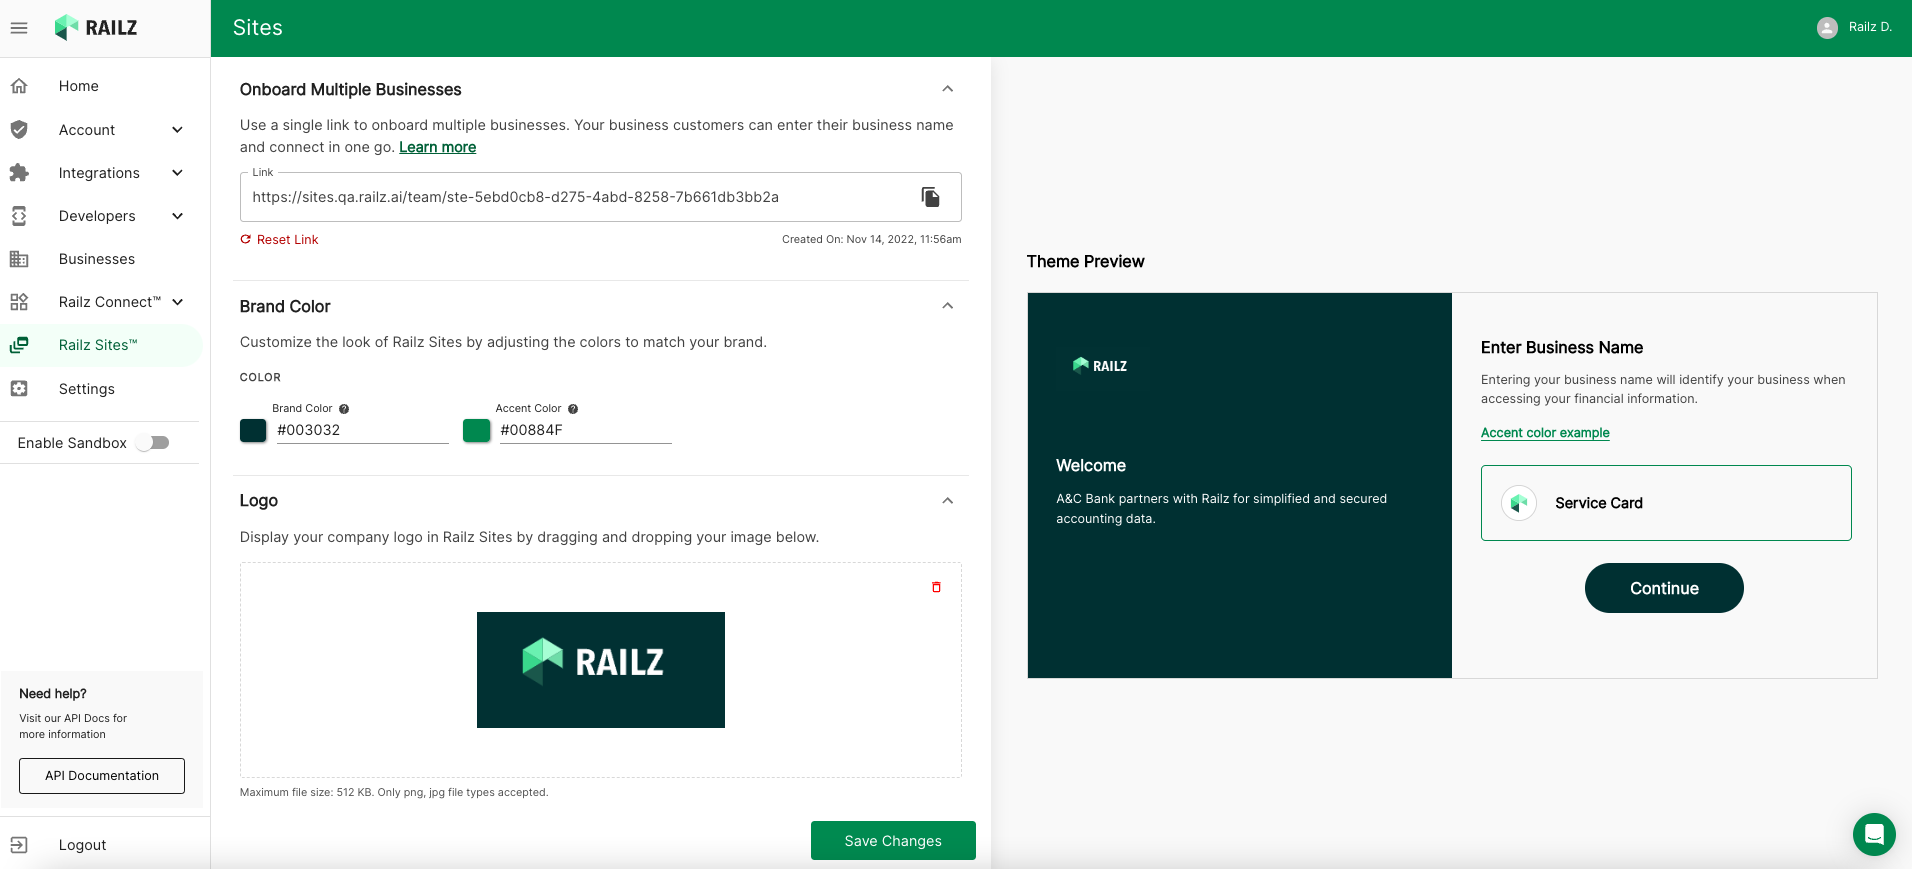 Railz Sites brand settings page. Click to Expand.